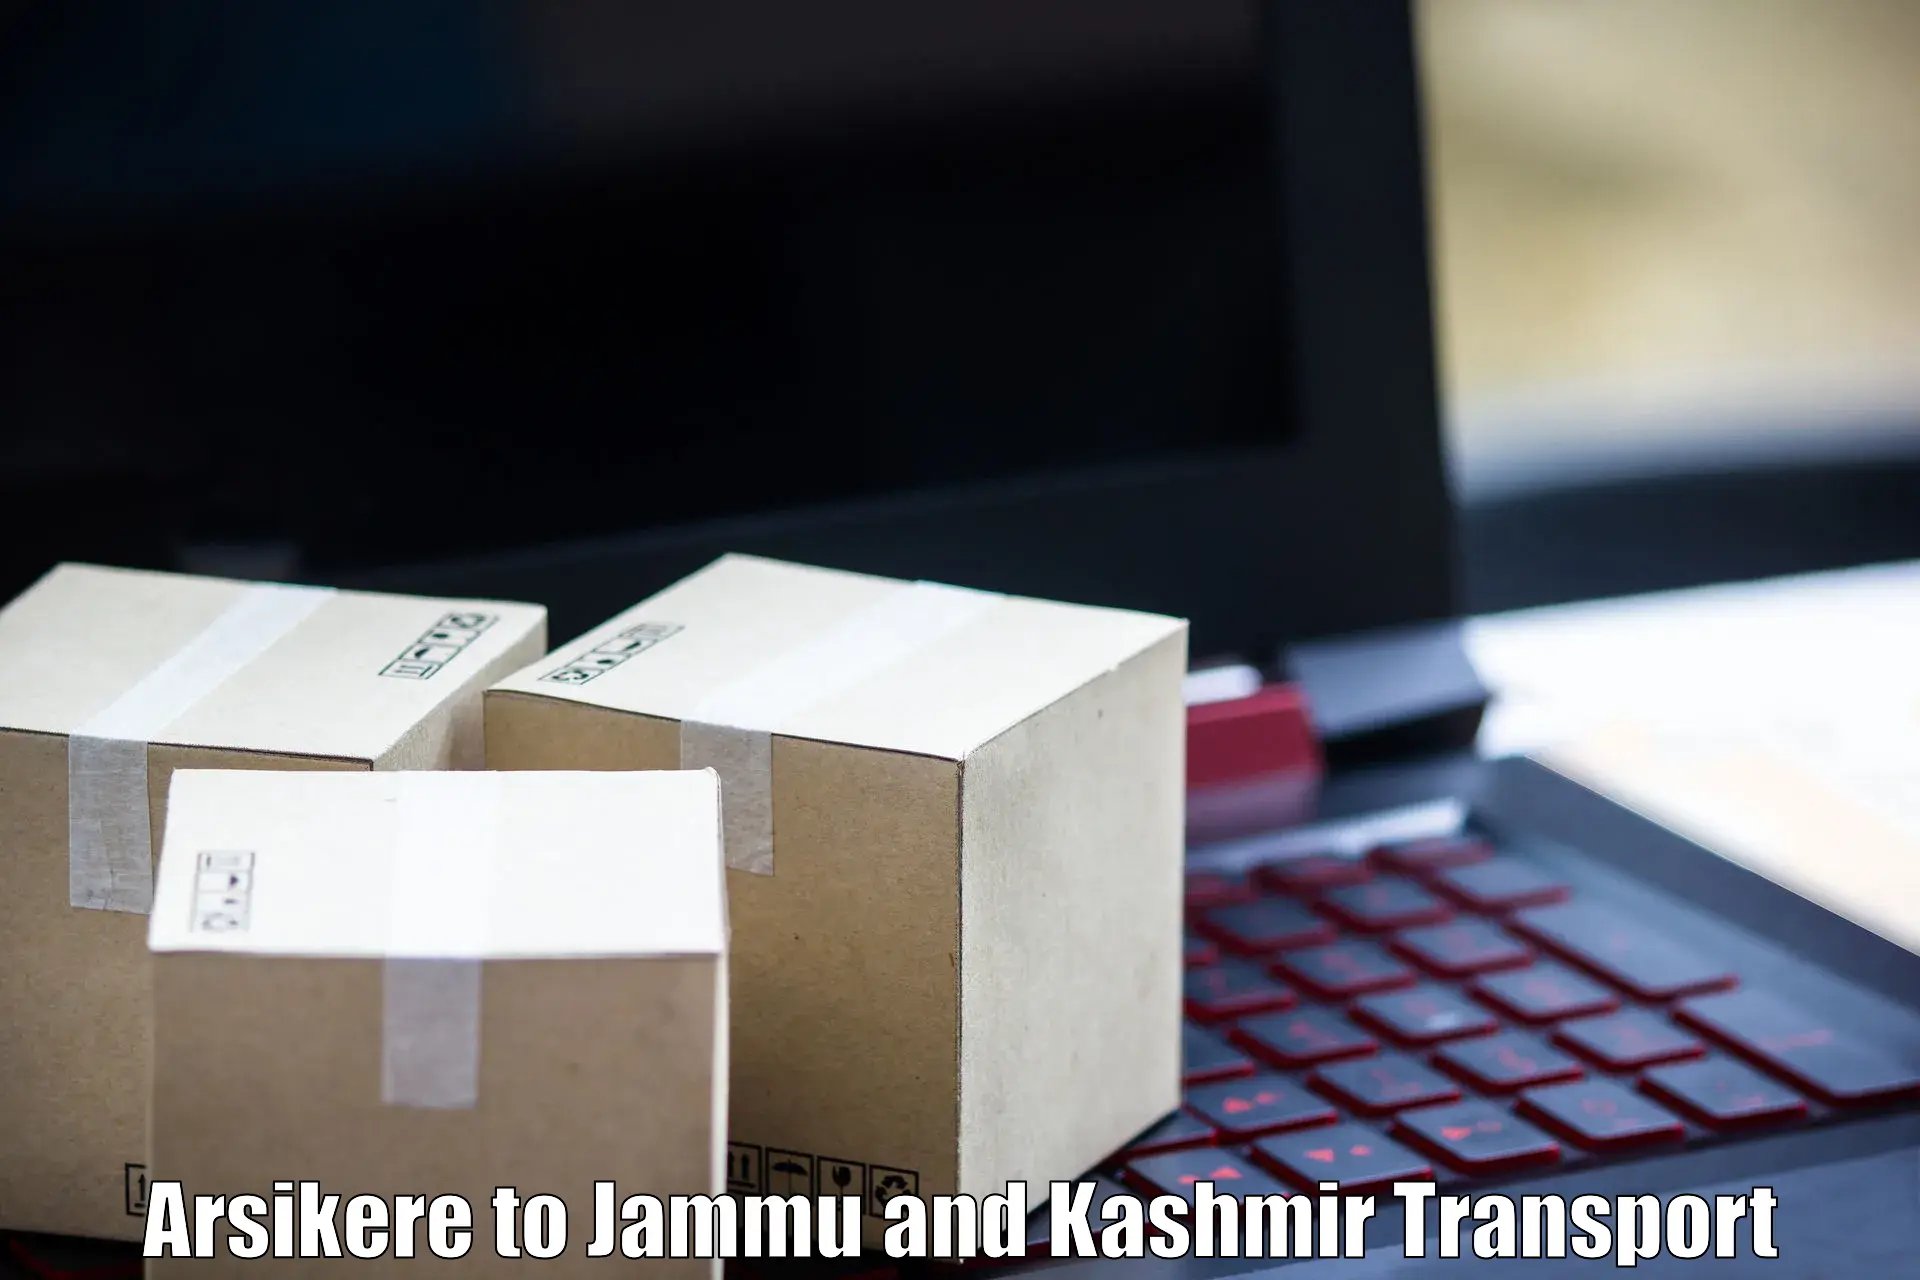 Express transport services Arsikere to Shopian